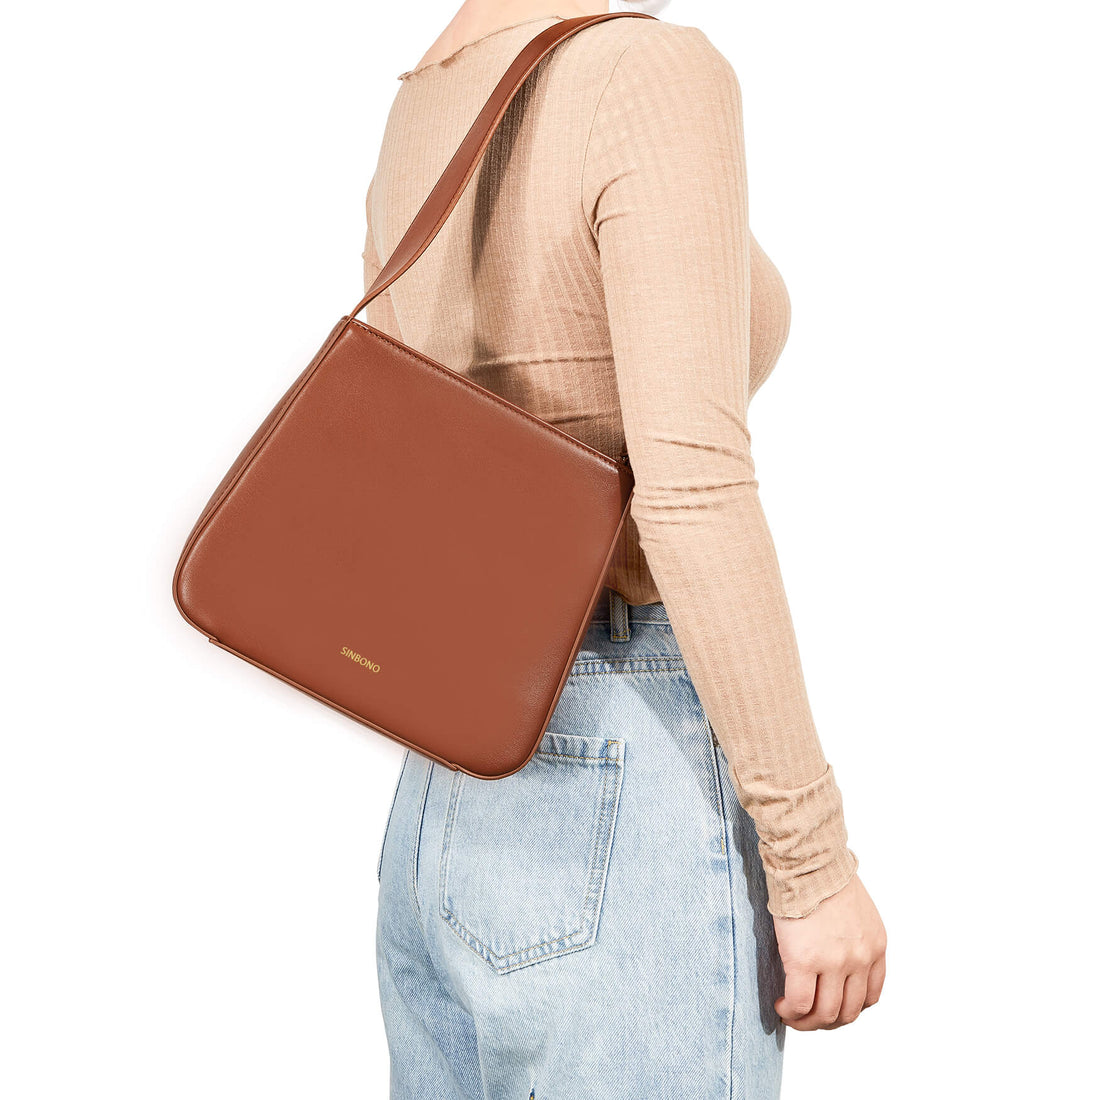 SINBONO Betty Shoulder Bag  - Sustainable Leather Bag 